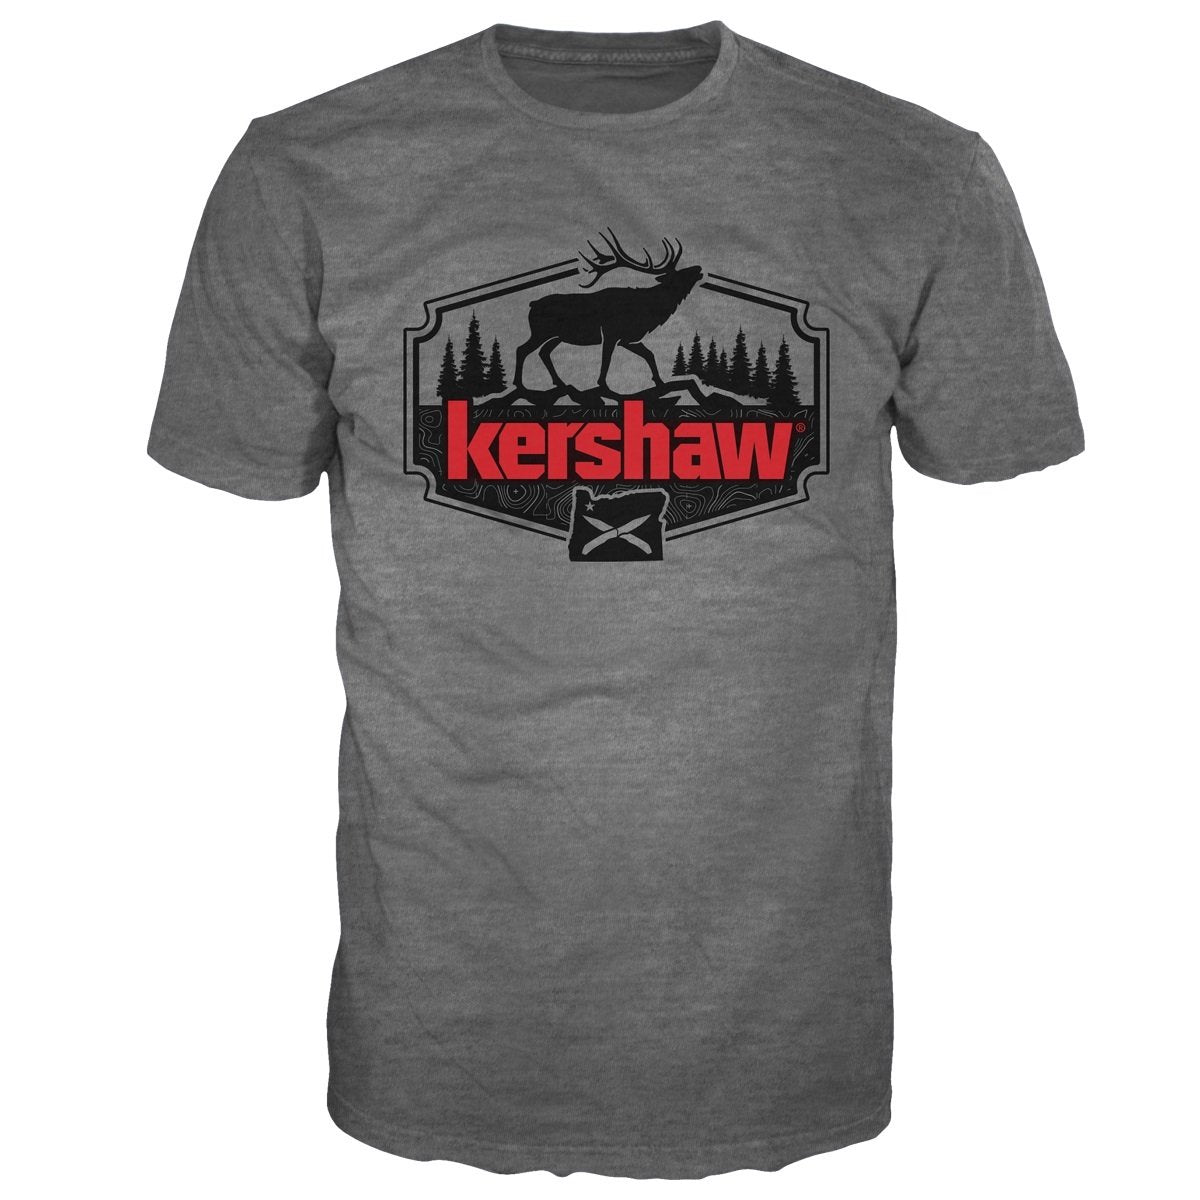 KERSHAW T-SHIRT - BACKCOUNTRY LIFE MED